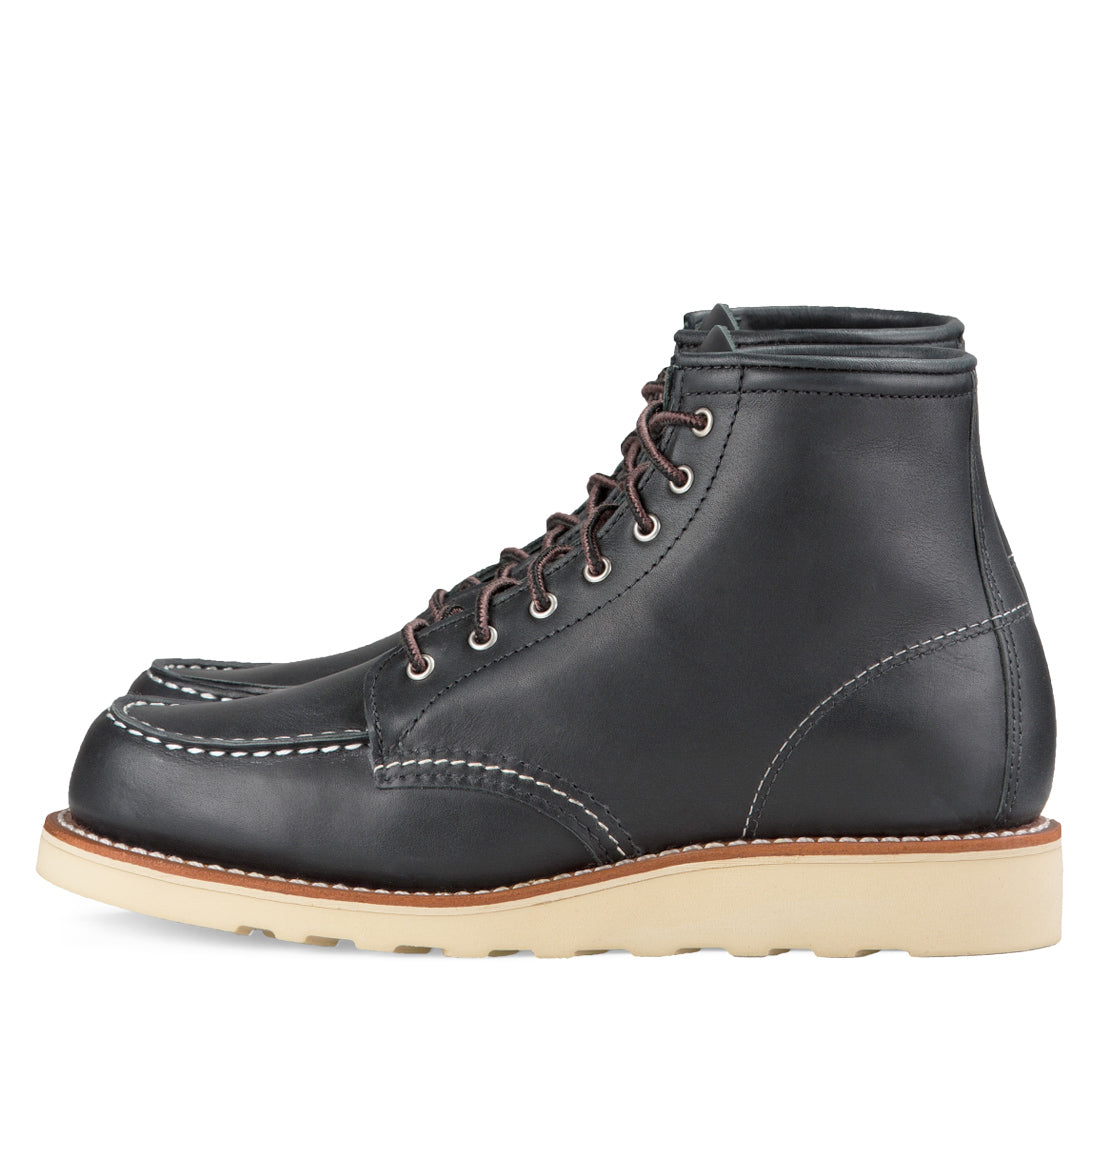 Women' red wing boots 3373